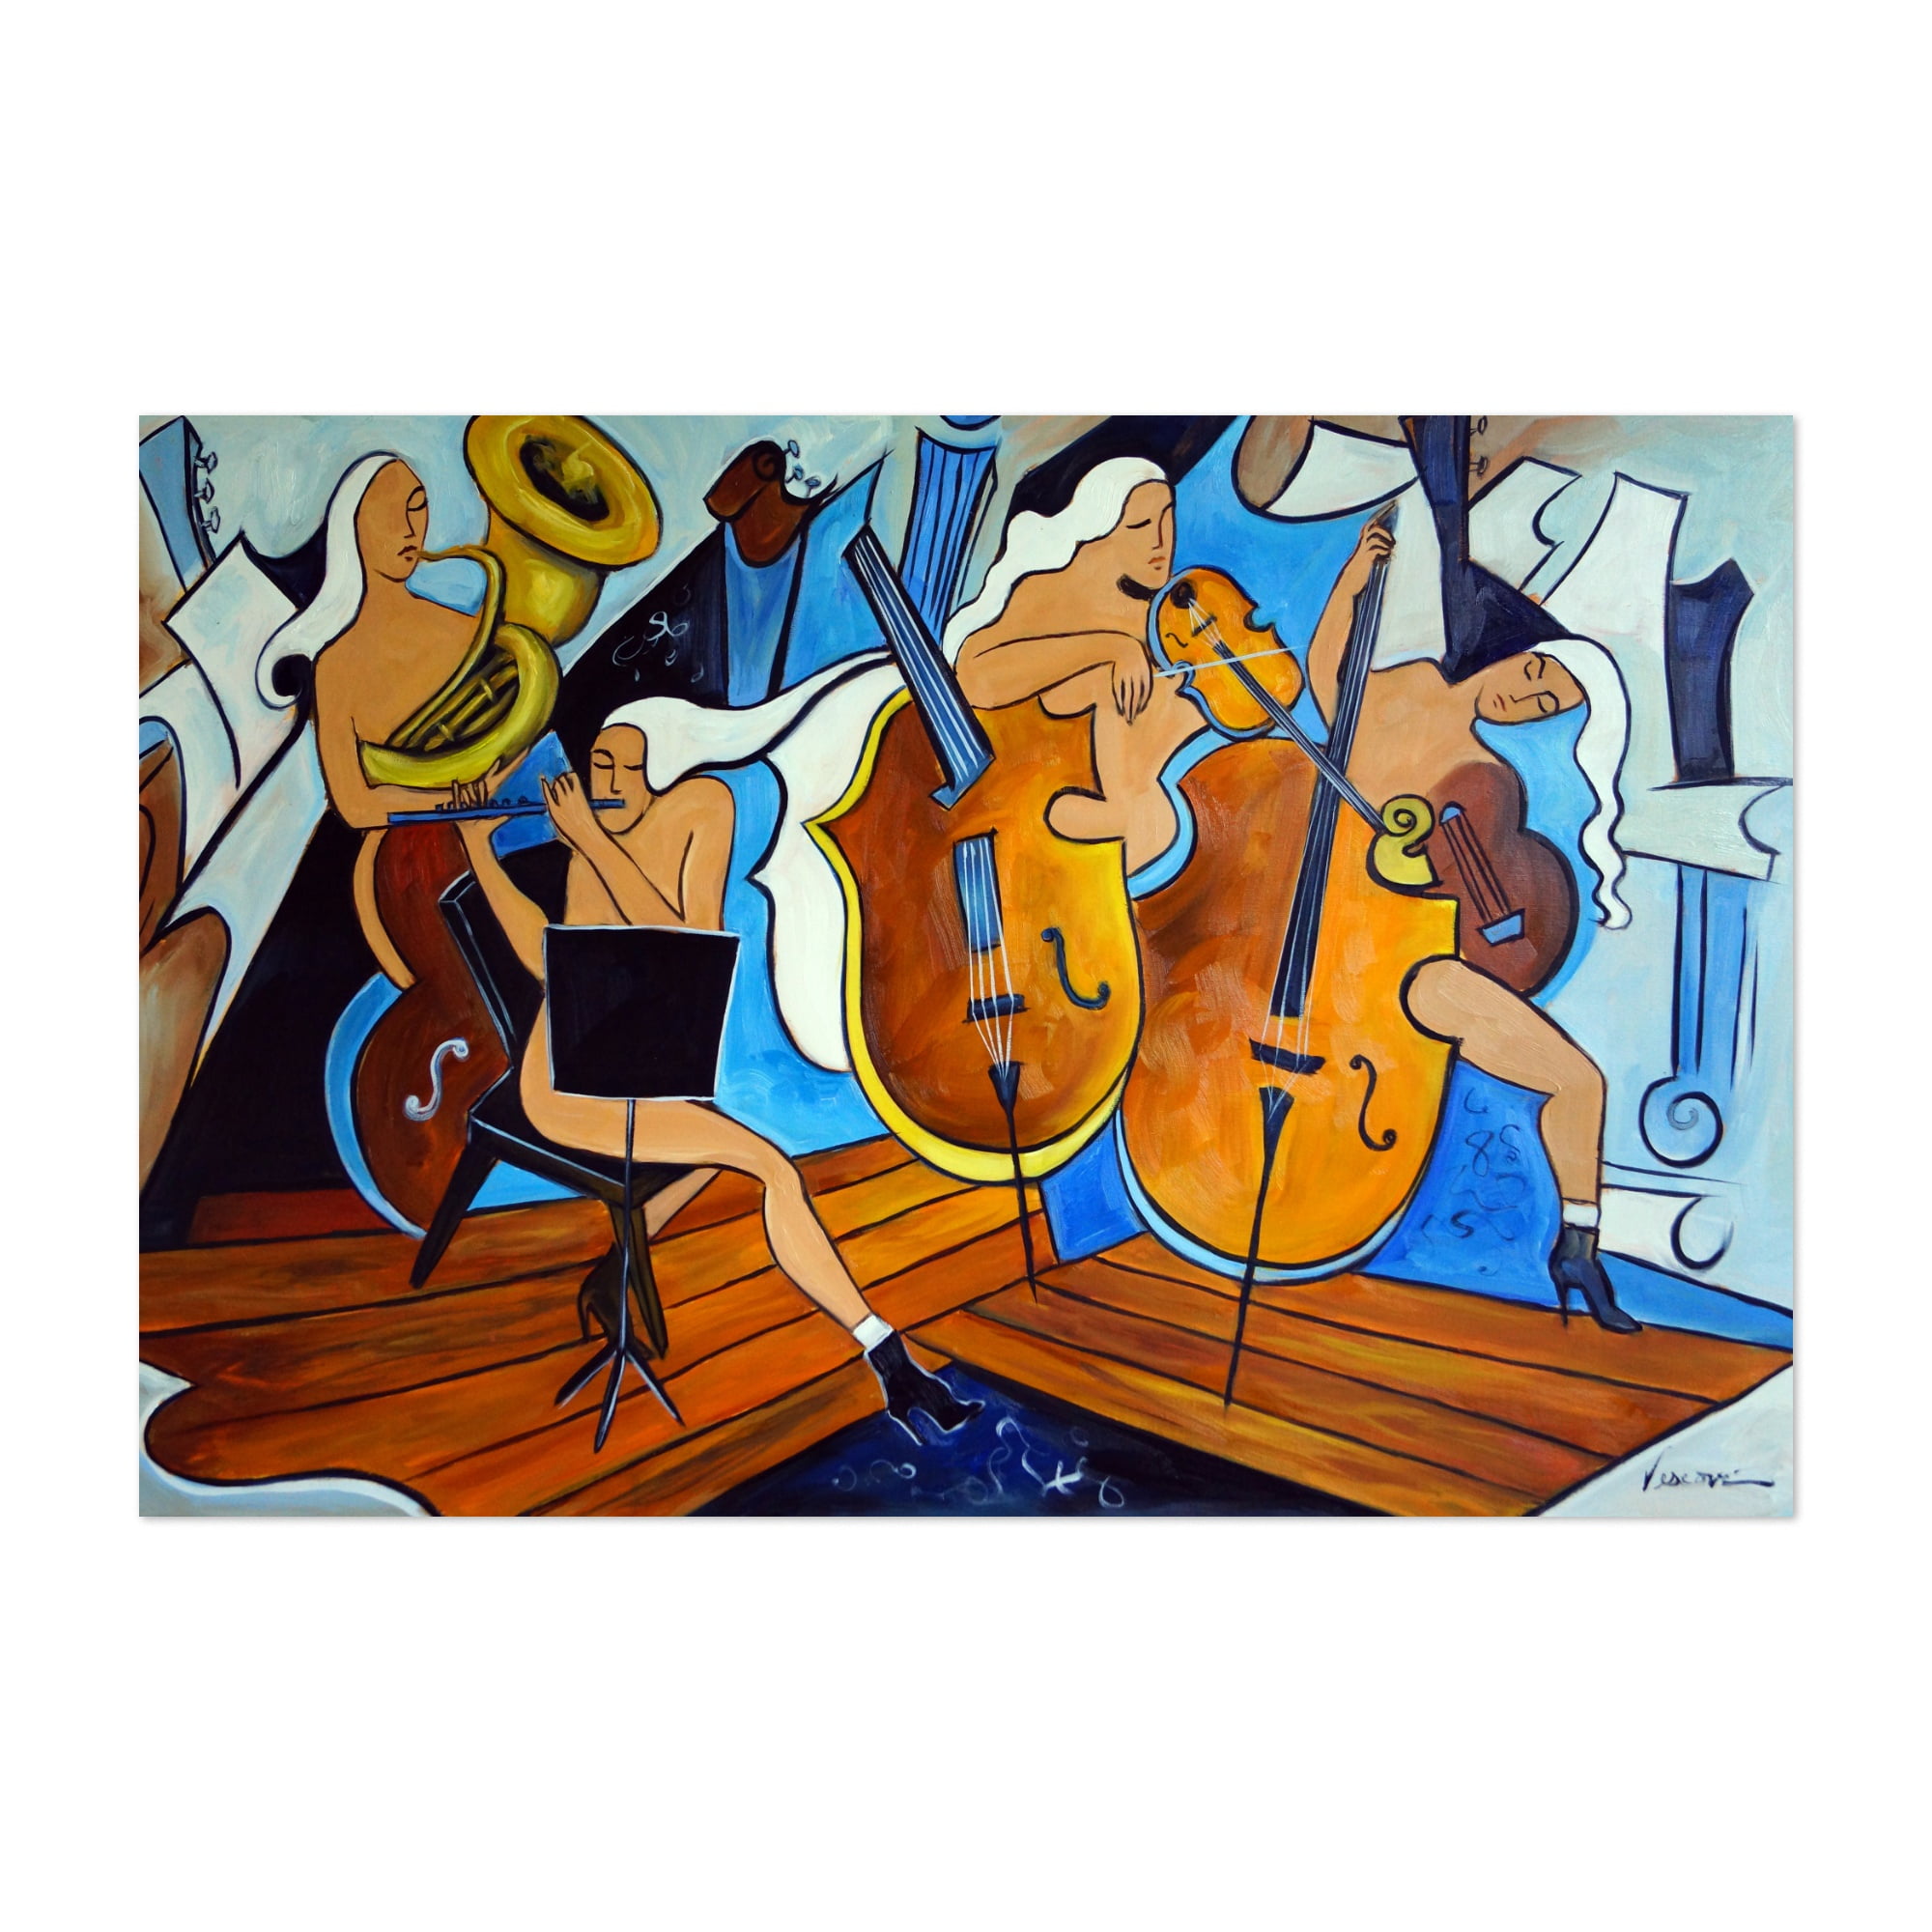 DIY Paint by Numbers for Adults DIY Canvas Painting by Numbers for Adult Kids 16 W x 20 L-Abstract Cello Musical Instrument_Framed